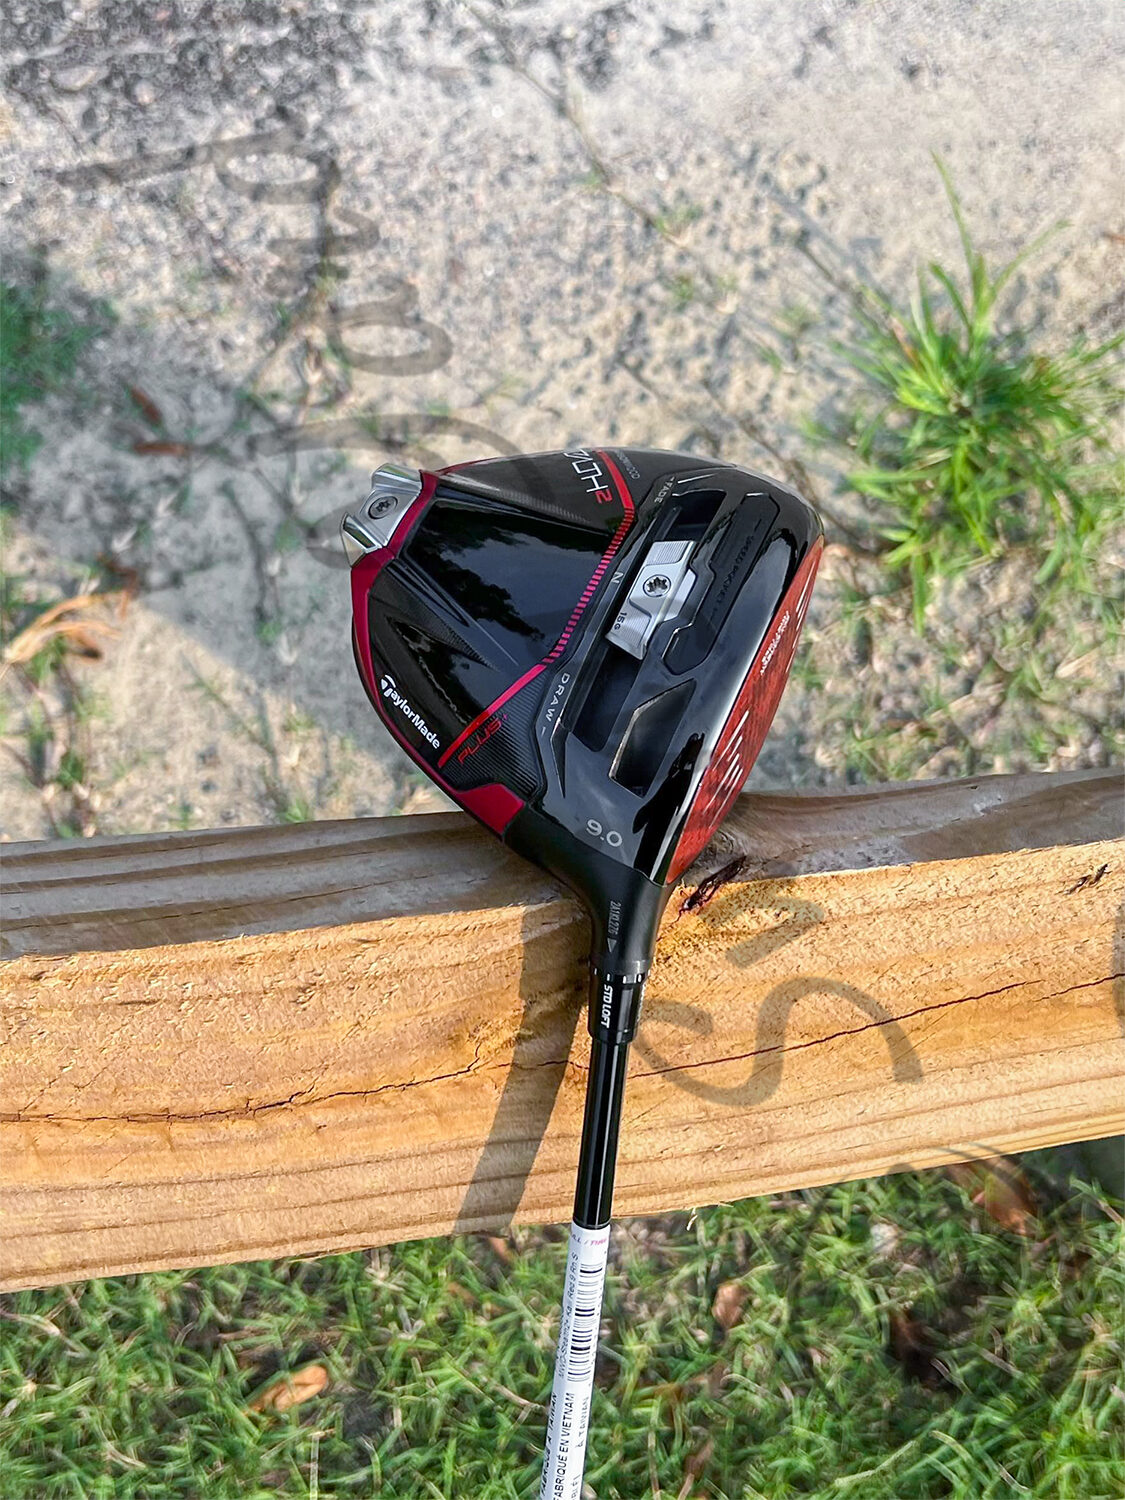 One of the best golf drivers stealth 2 plus